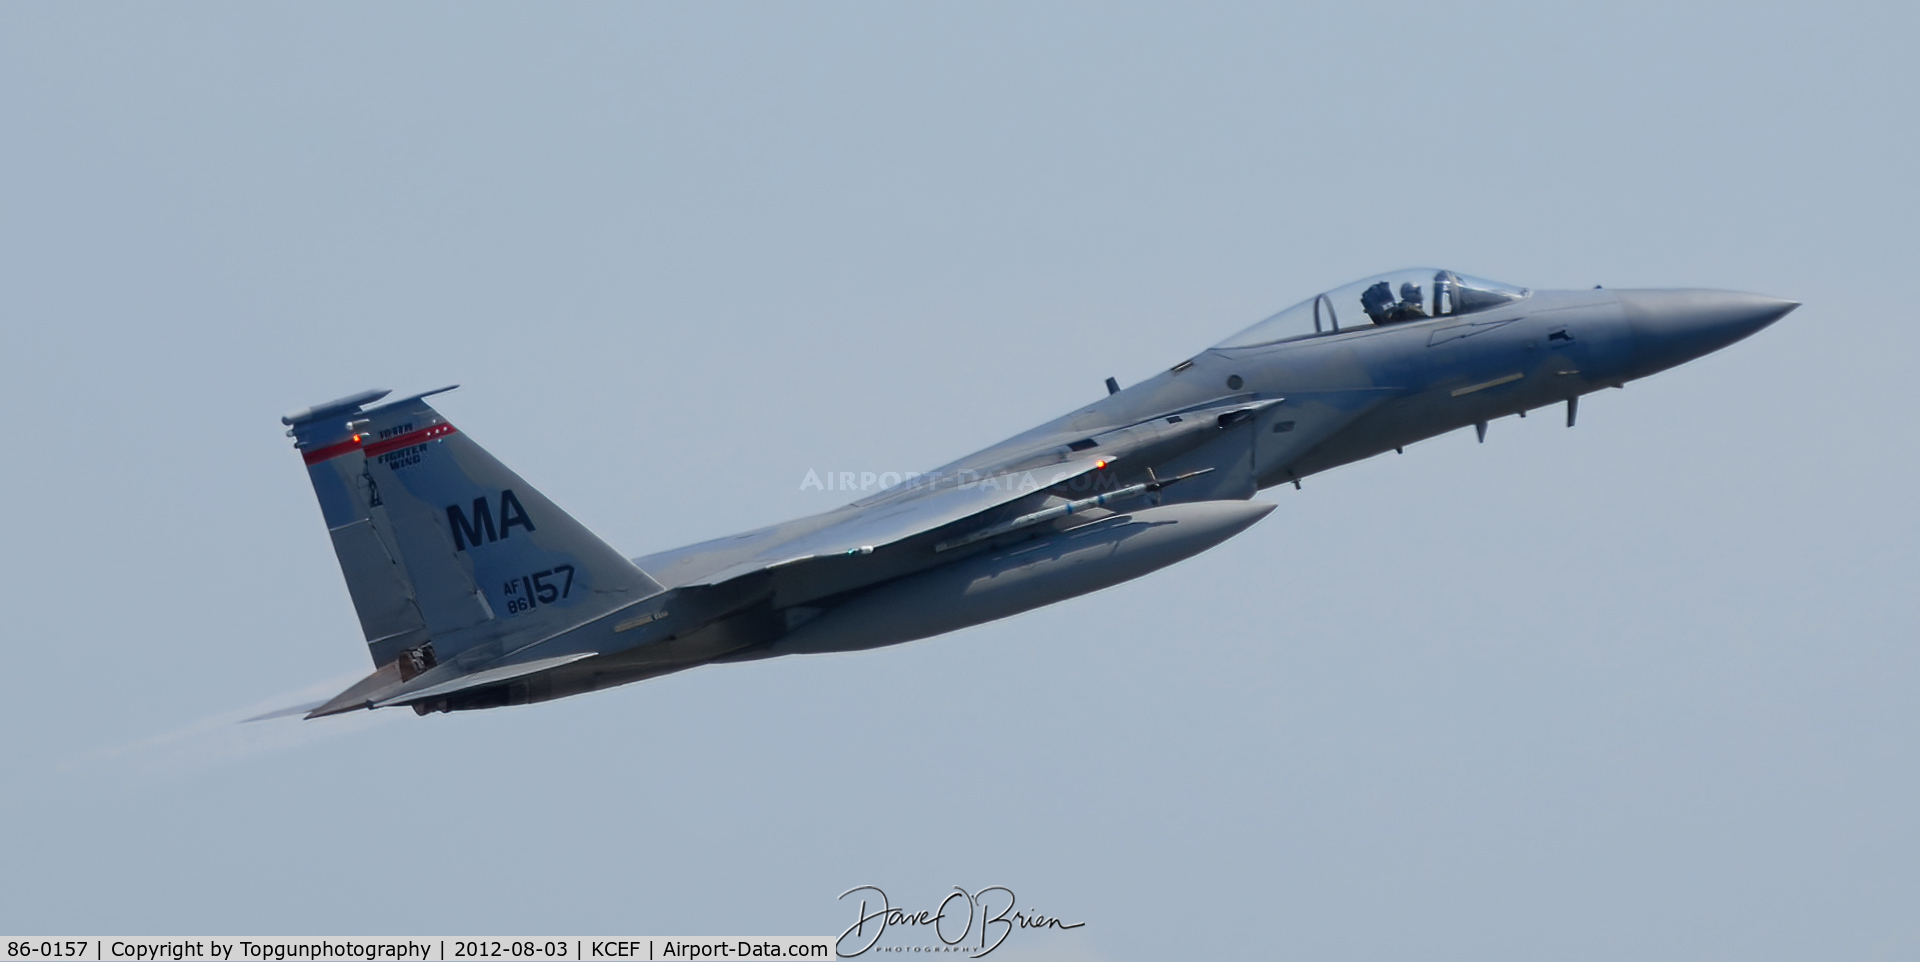 86-0157, 1986 McDonnell Douglas F-15C Eagle C/N 1005/C385, 104th FW shooting a missed approach